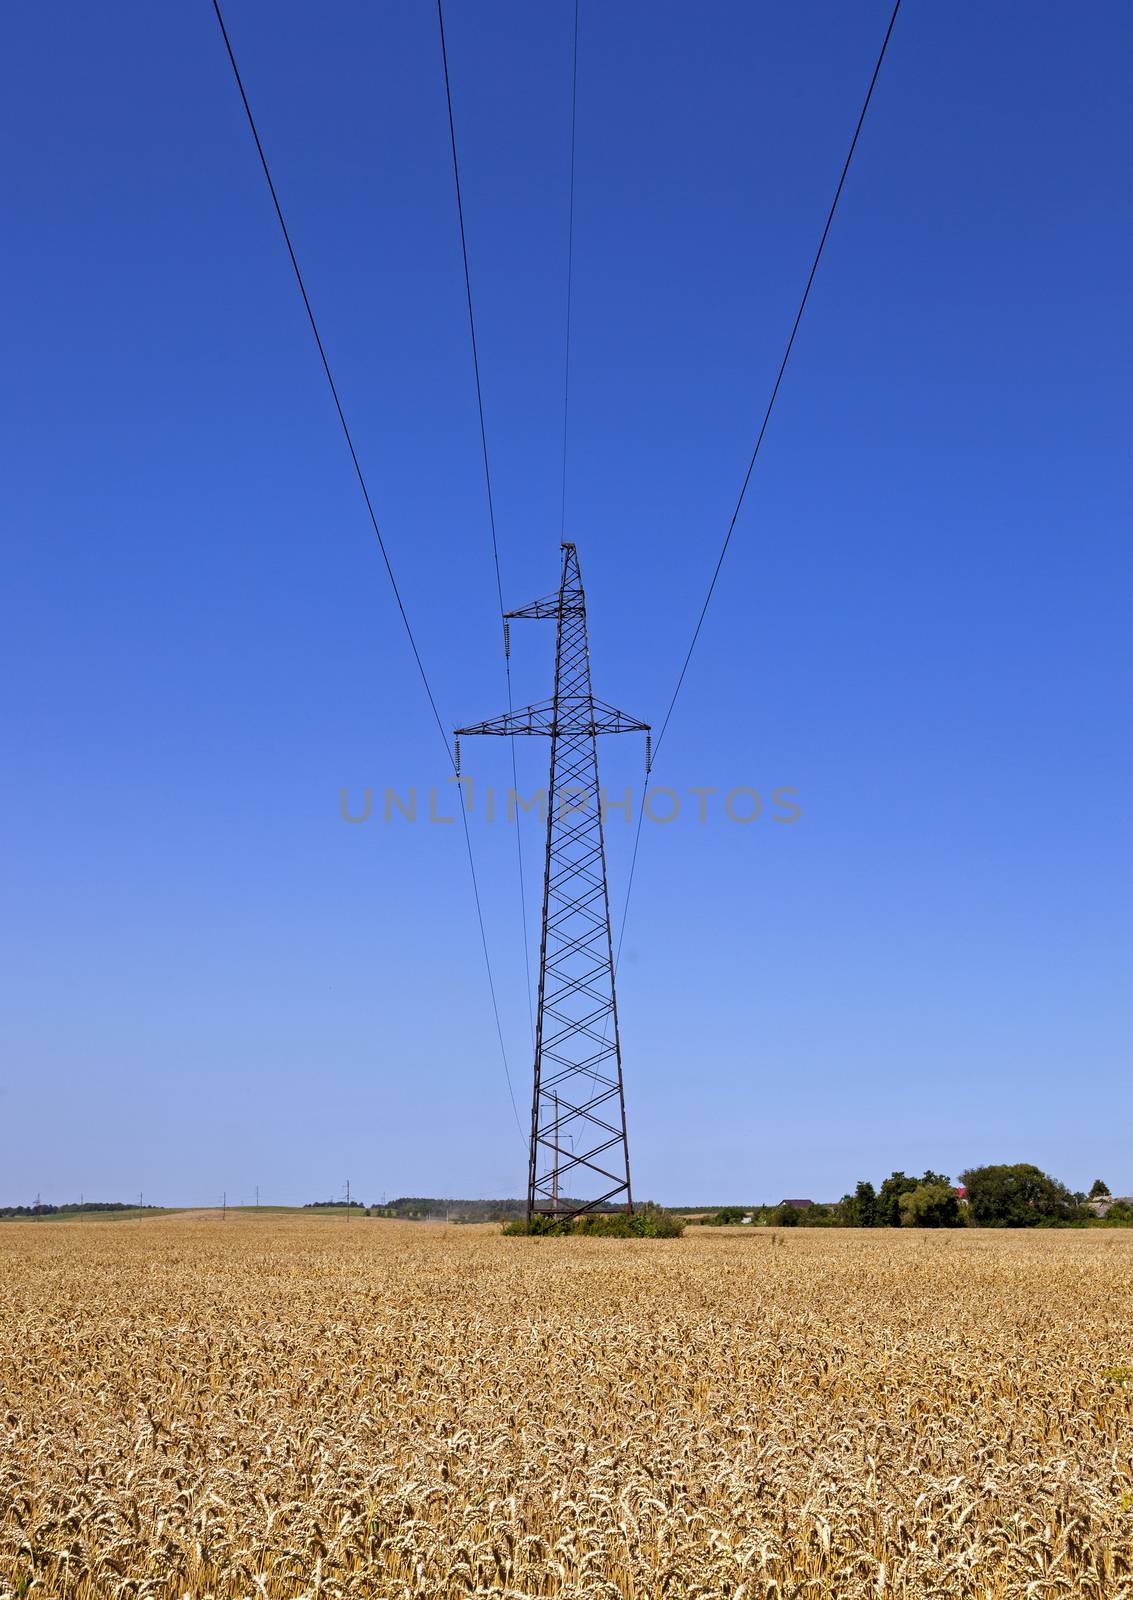   the high-voltage lines of electric transfers being in an agricultural field